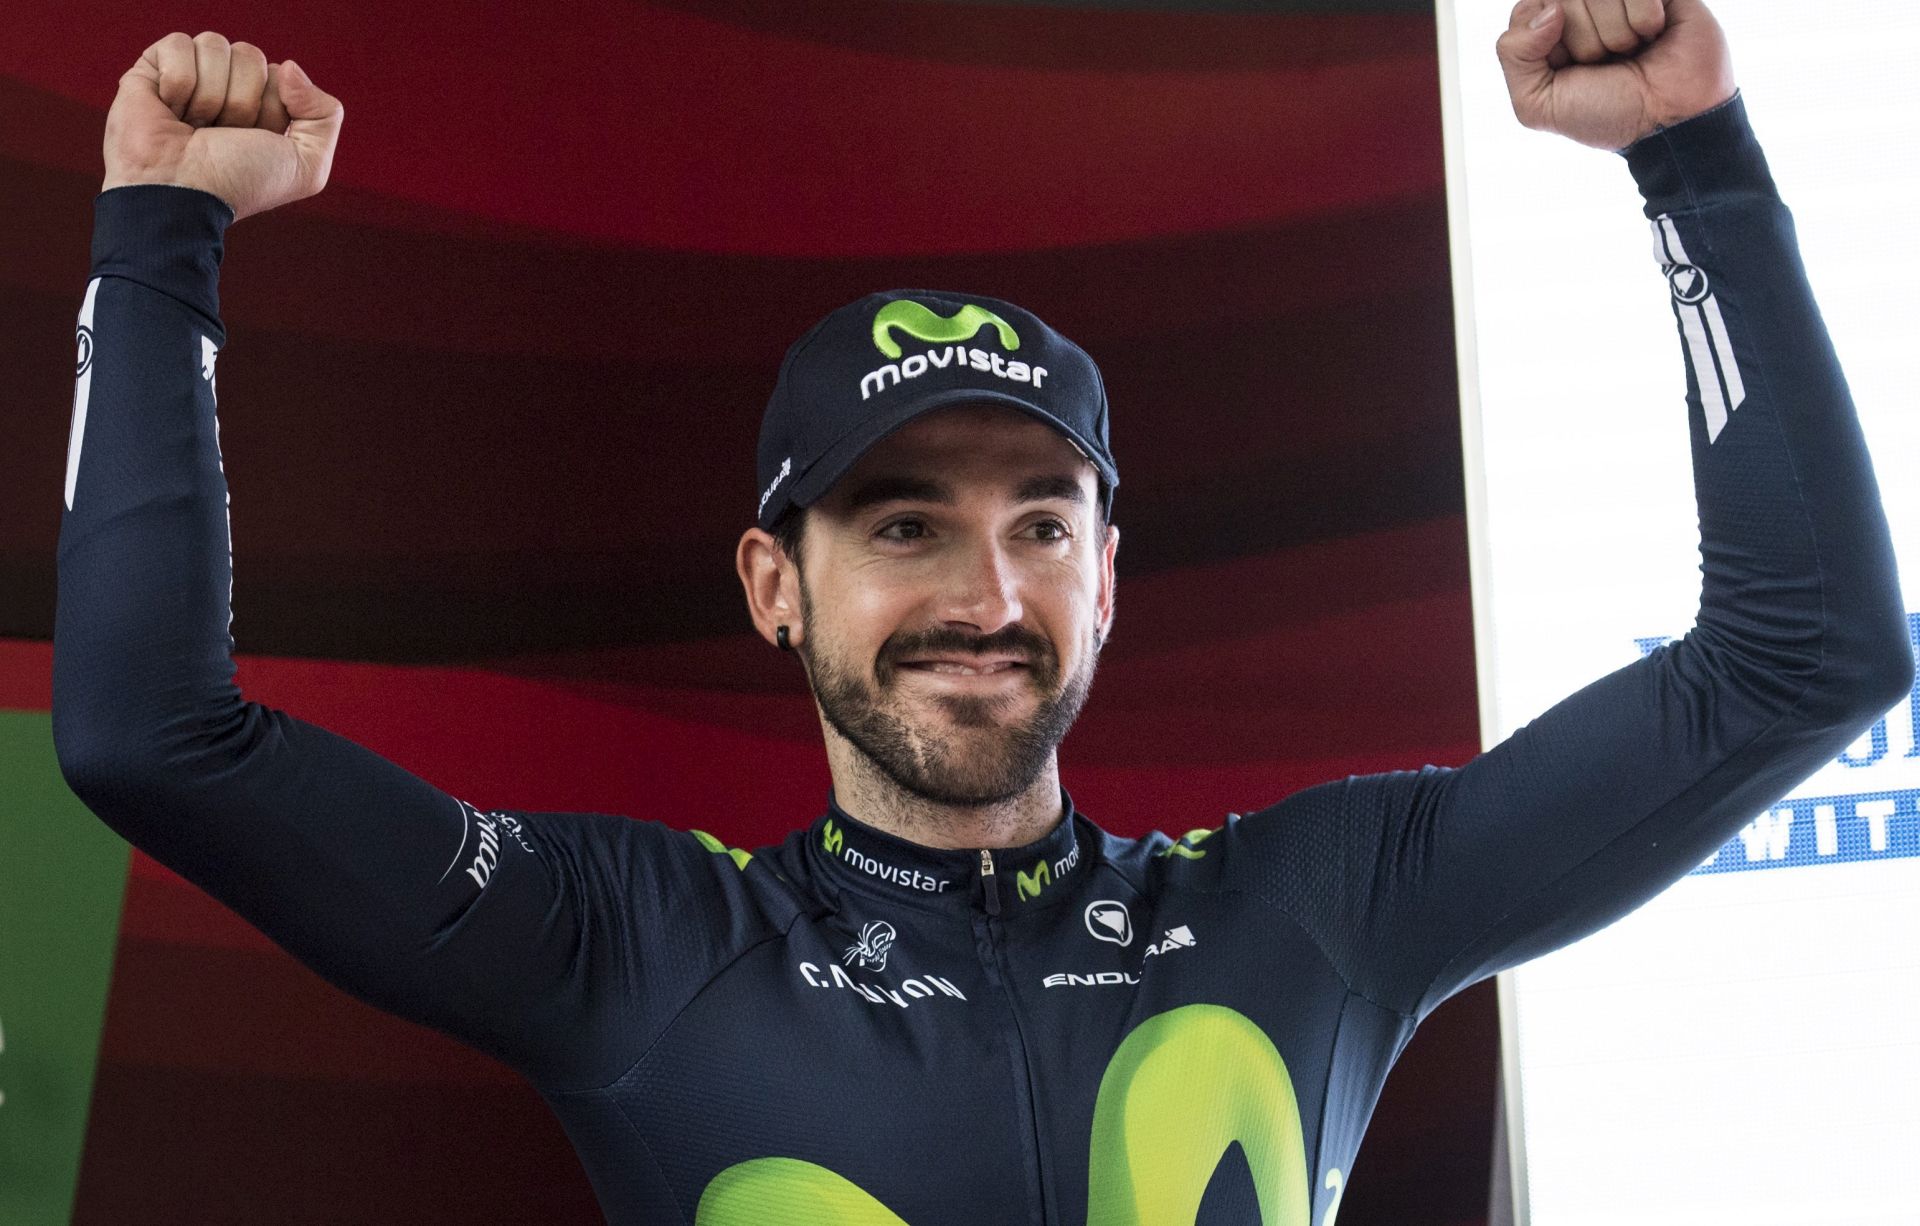 epa05375453 Jon Izaguirre Insausti from Spain of Movistar Team celebrates after the 8th stage of the 80th Tour de Suisse UCI ProTour cycling race, in Davos, Switzerland, 18 June 2016.  EPA/GIAN EHRENZELLER